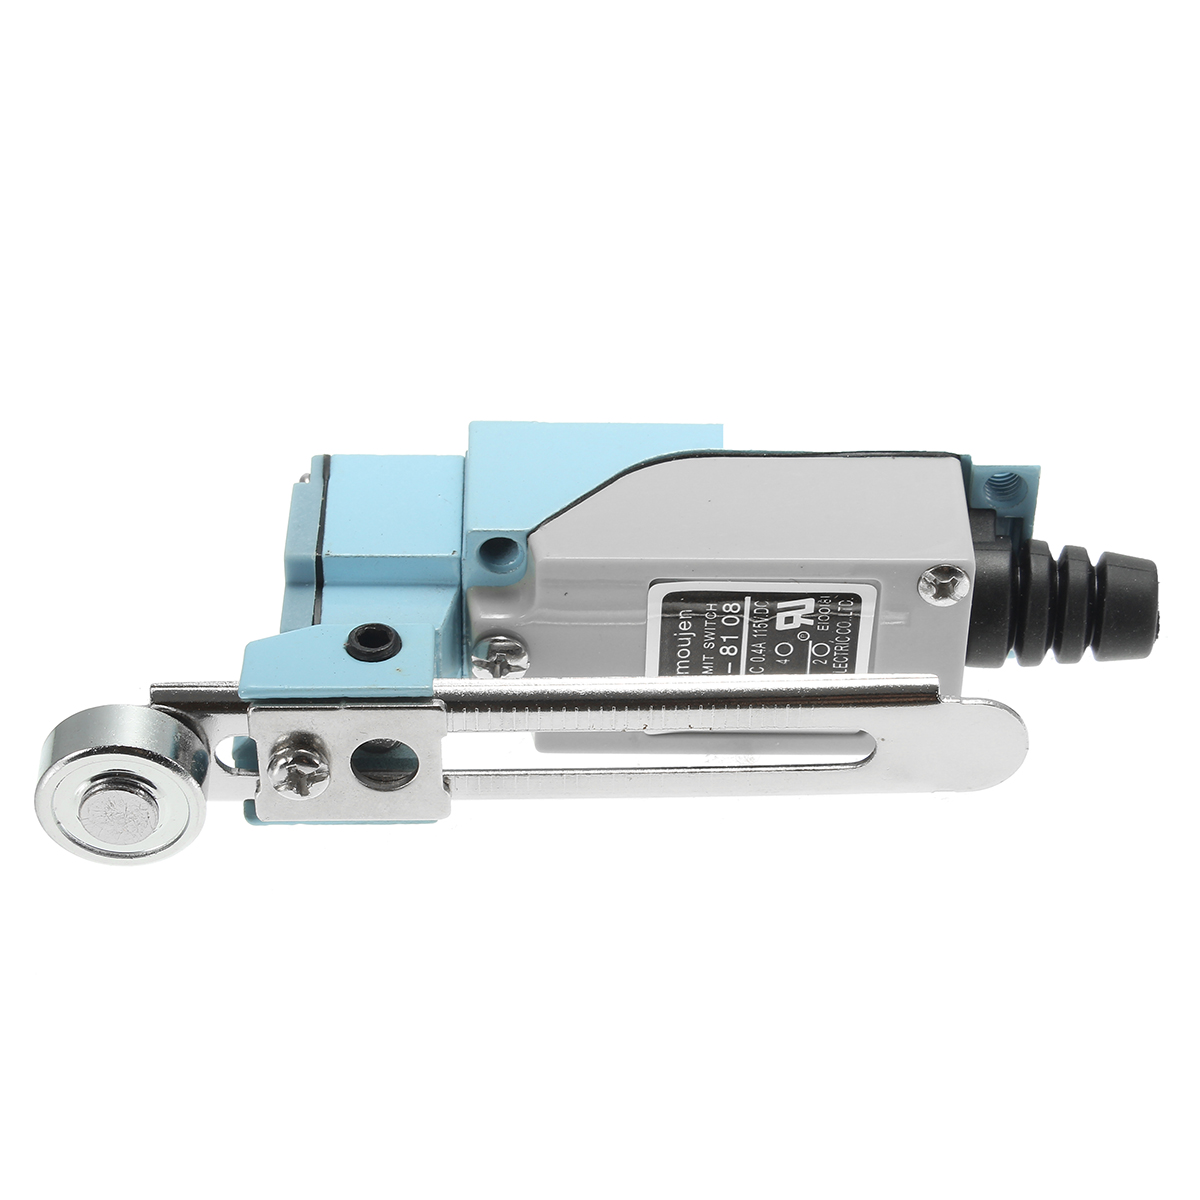 10-Types-250VAC-Limit-Switch-IP65-Adjustable-Actuator-Roller-Arm-Rod-Spring-Coil-Endstop-Switch-1297617-10